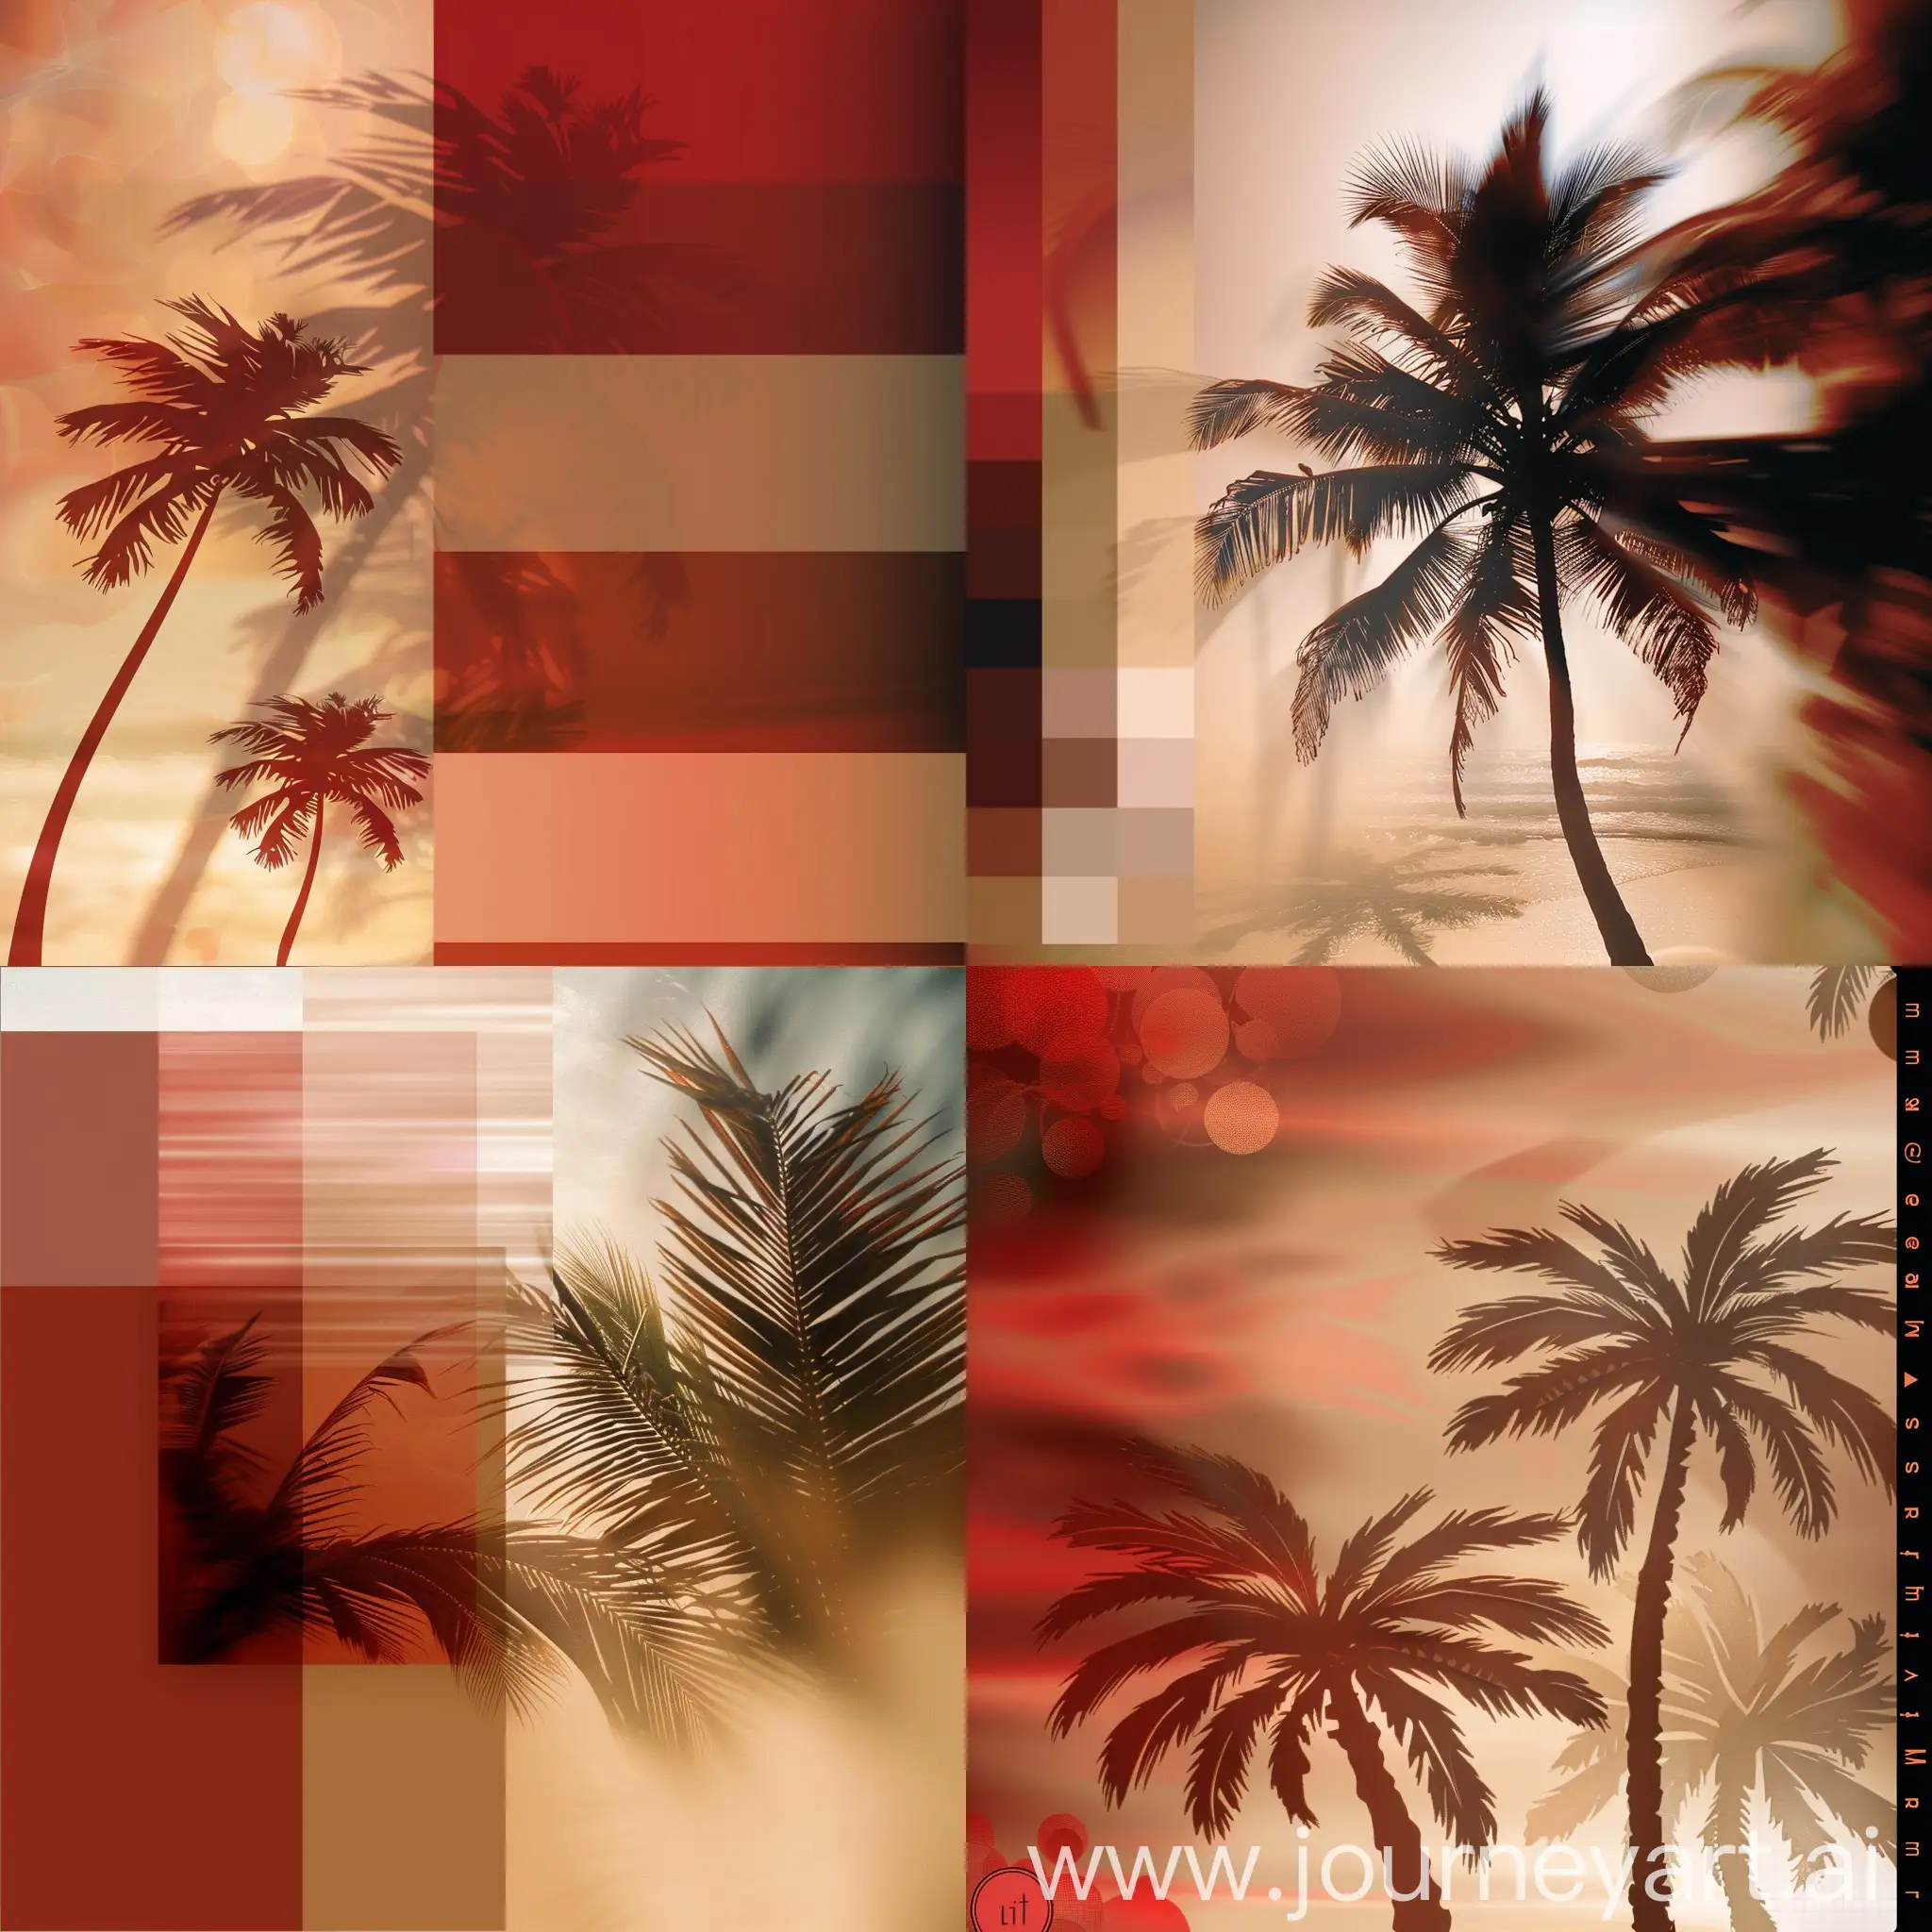 Beach-Inspiration-with-Palm-Tree-Shadows-in-Red-and-Earth-Tones